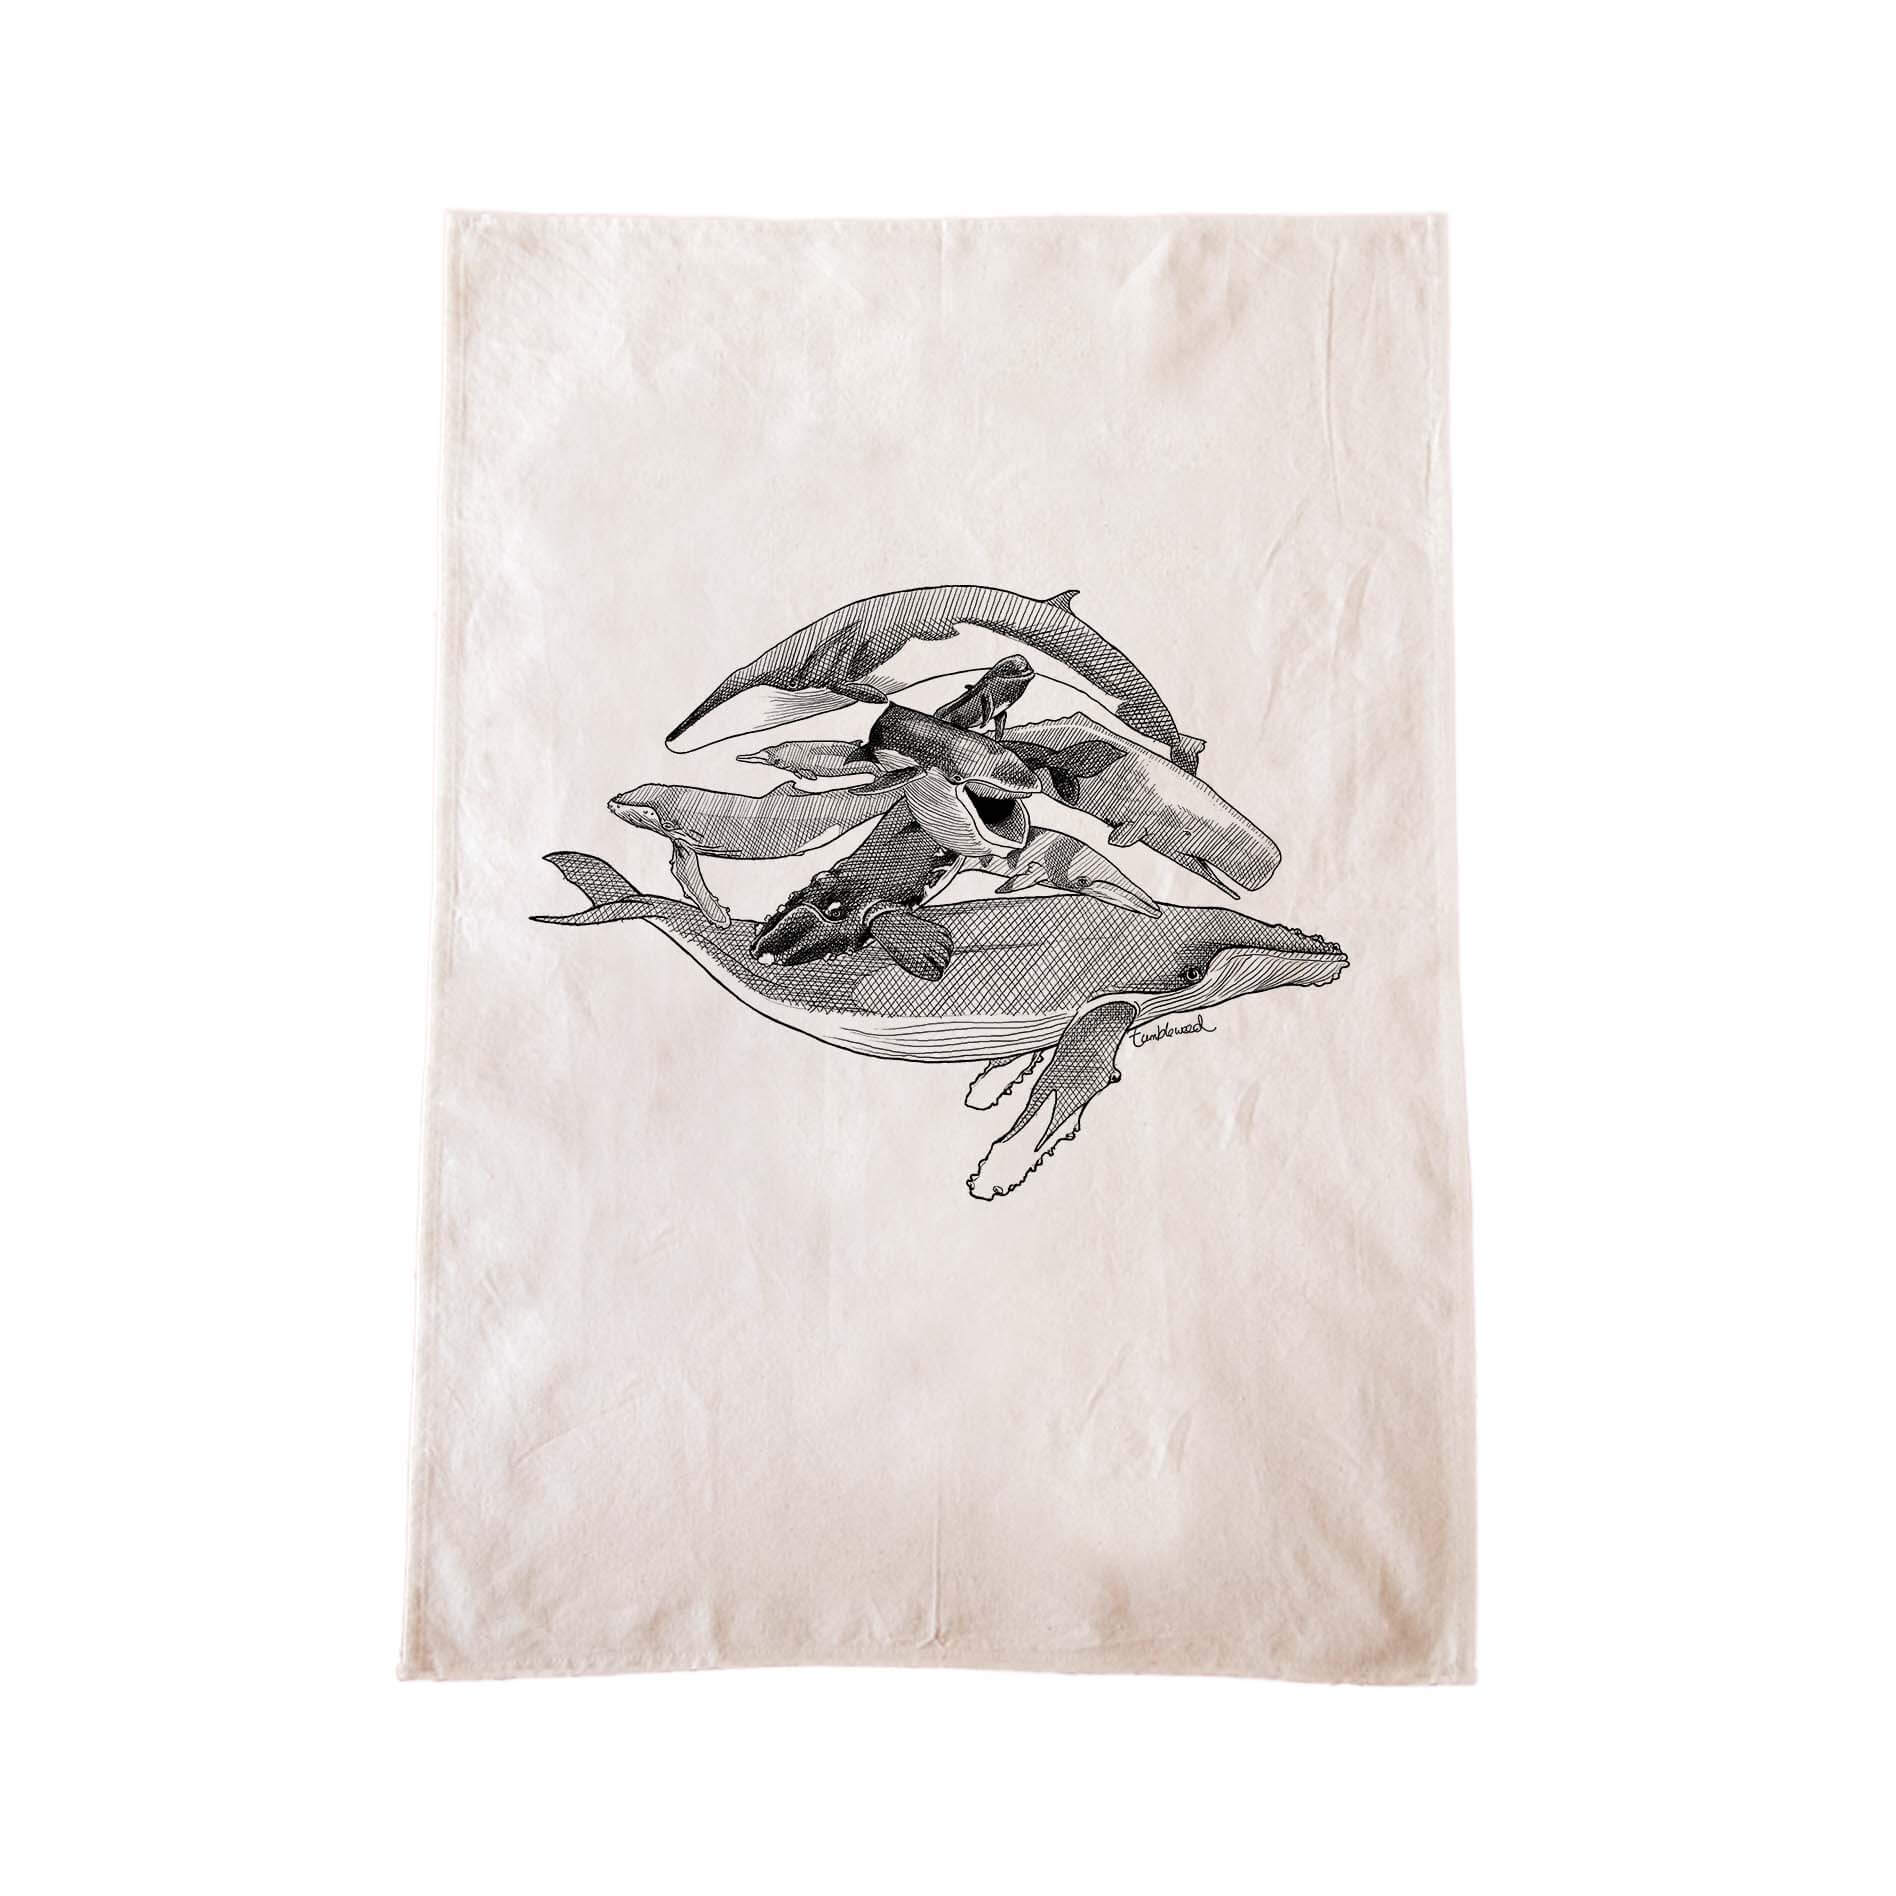 Off-white cotton tea towel with a screen printed Whales design.